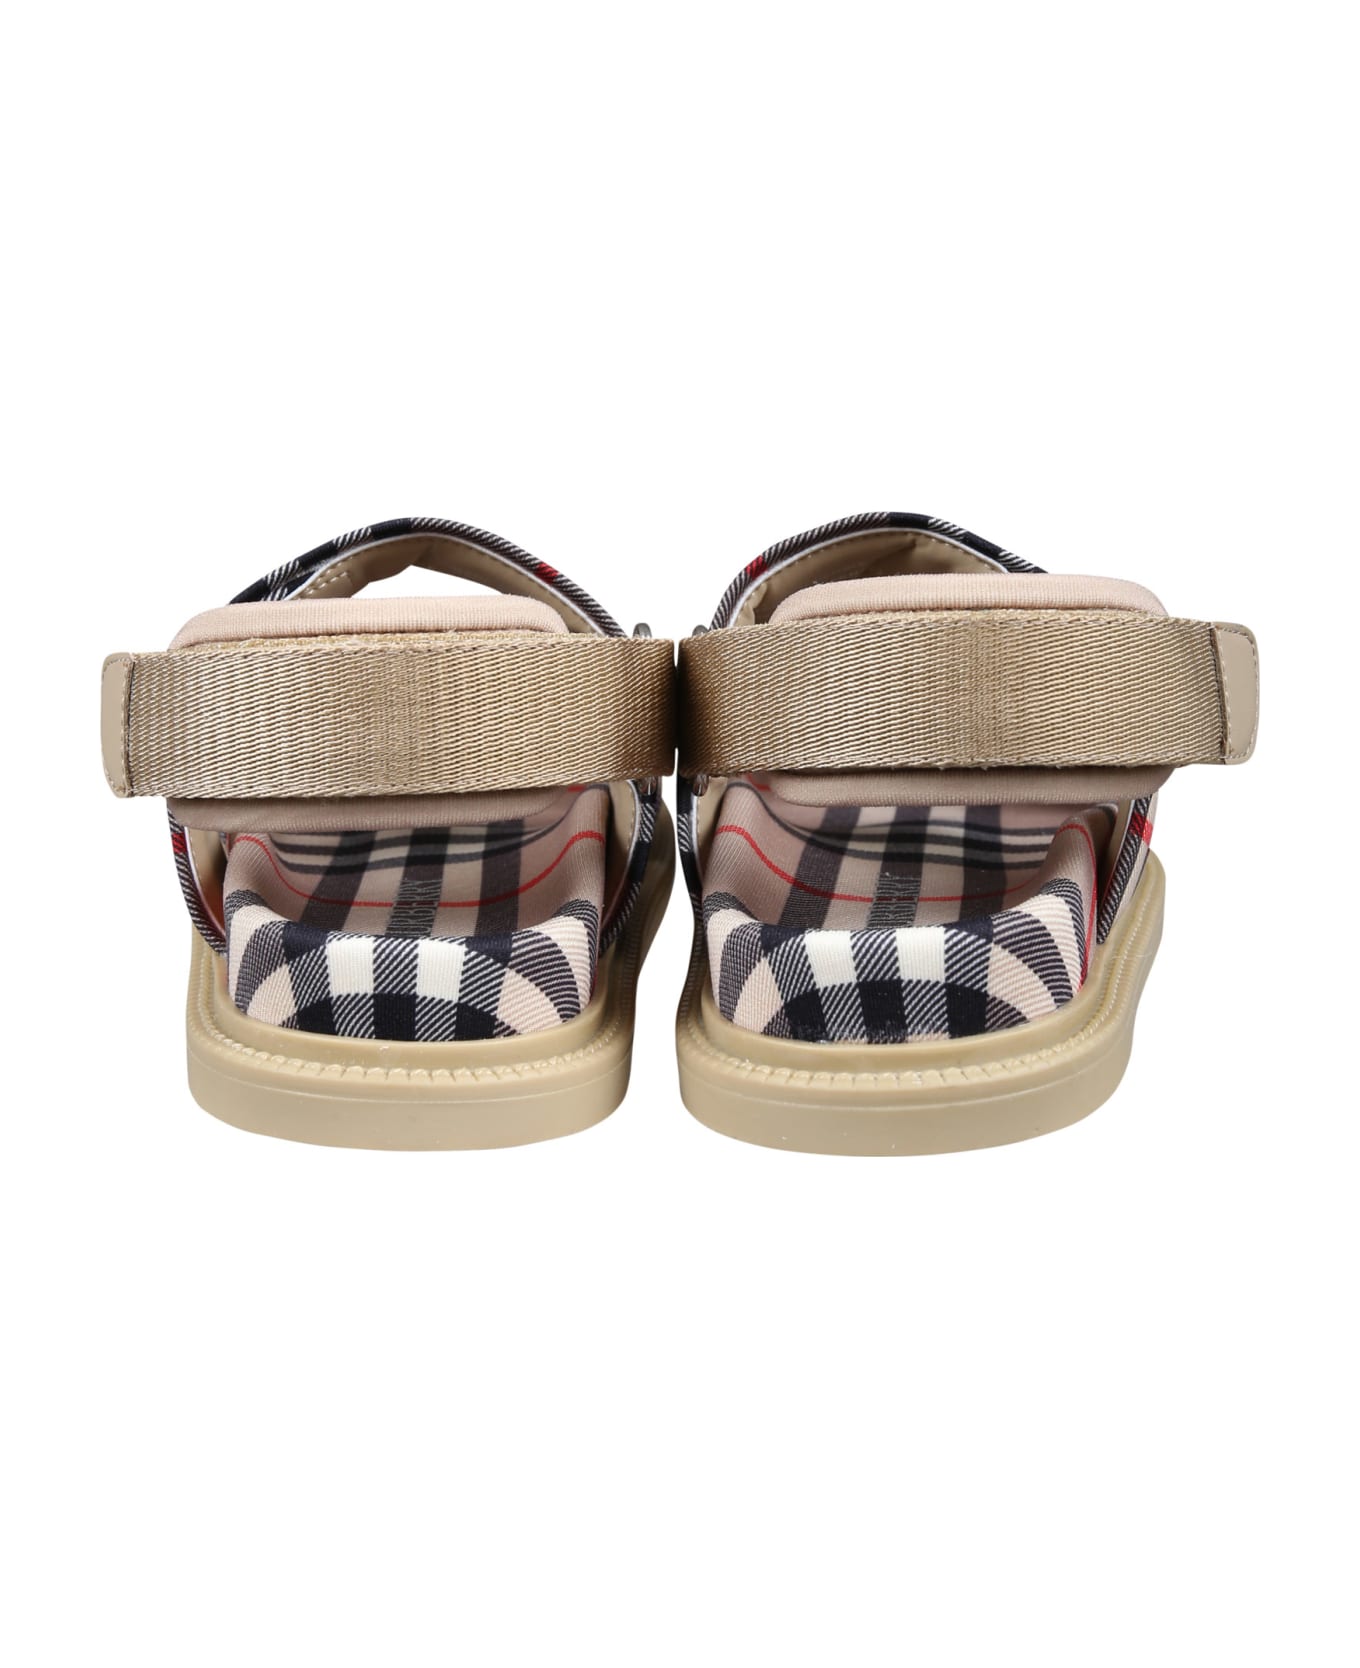 Burberry Beige Sandals For Kids With Vintage Check - Beige シューズ